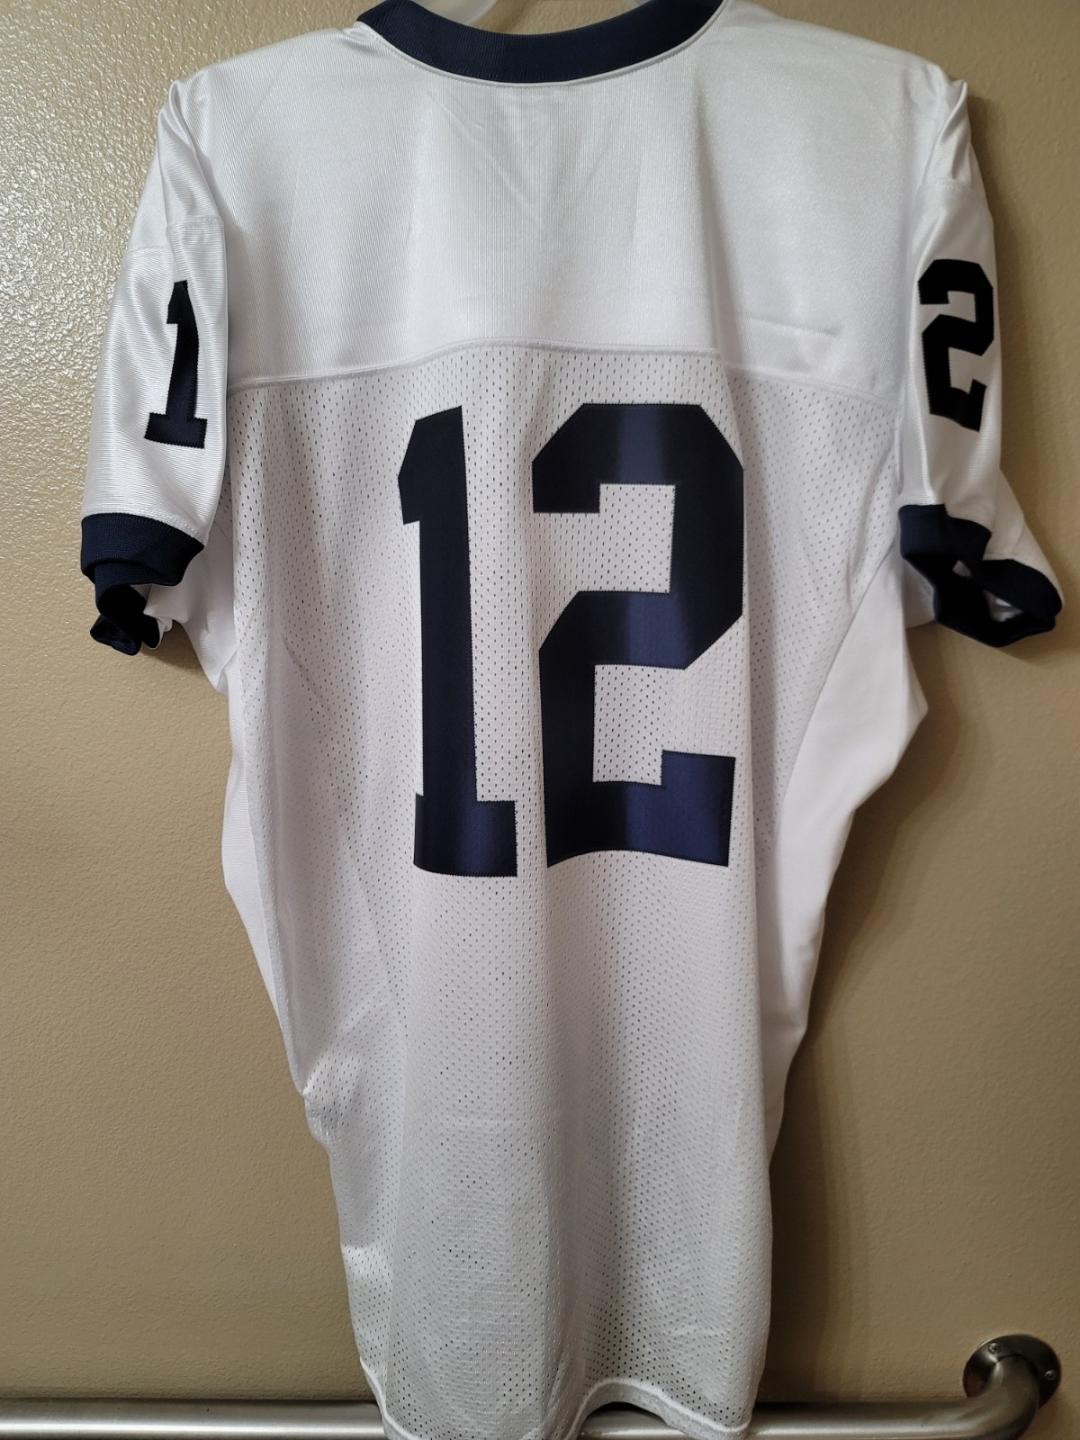 Mens Nike NCAA PENN STATE NITTANY LIONS PSU #12 AUTHENTIC Game JERSEY WHITE